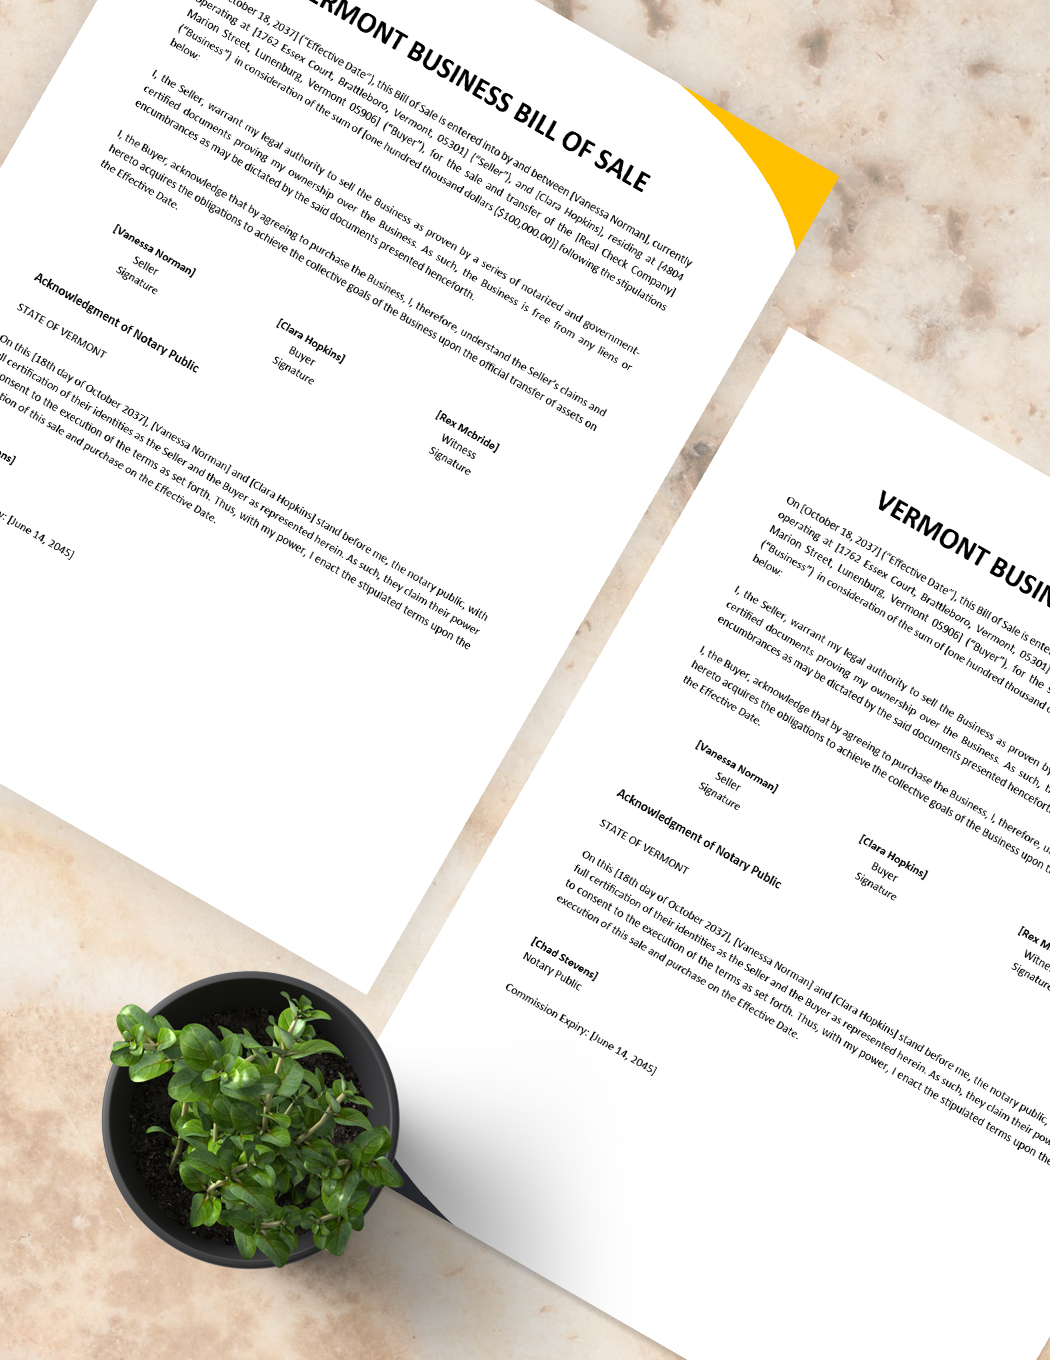 Vermont Business Bill of Sale Template